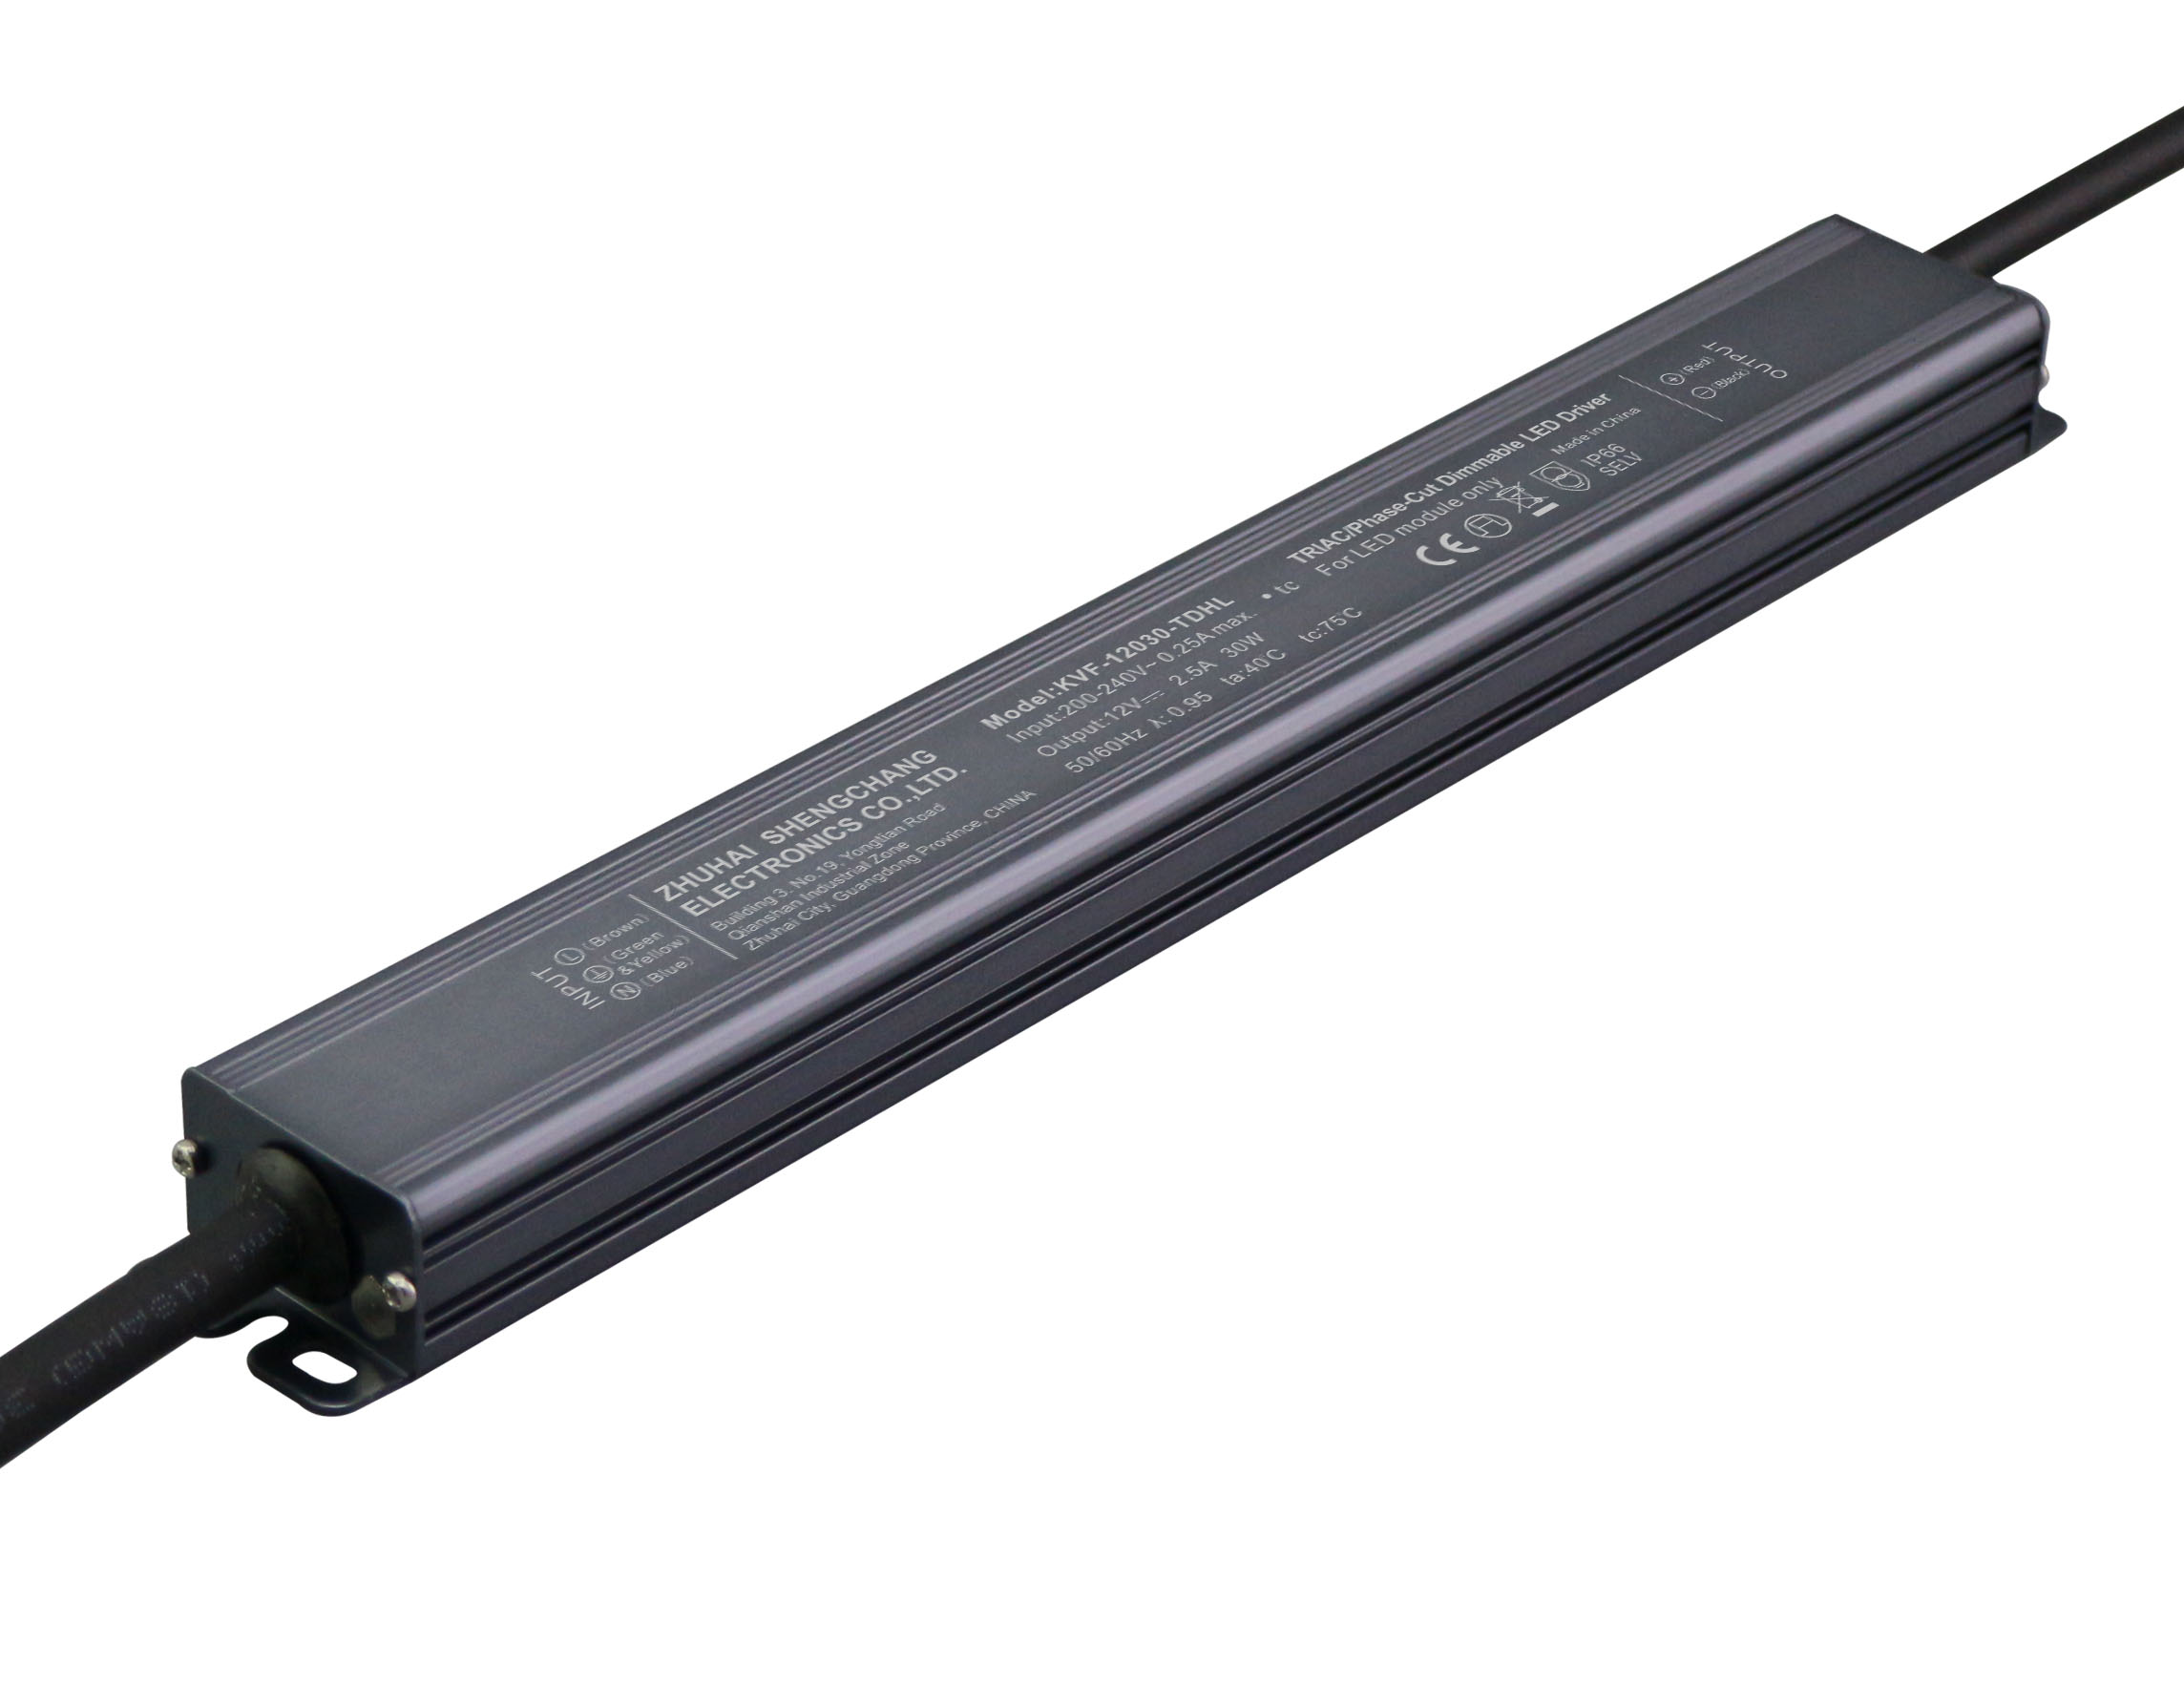 KVF-TDHL Series 30W Constant Voltage Triac Dimmable LED driver